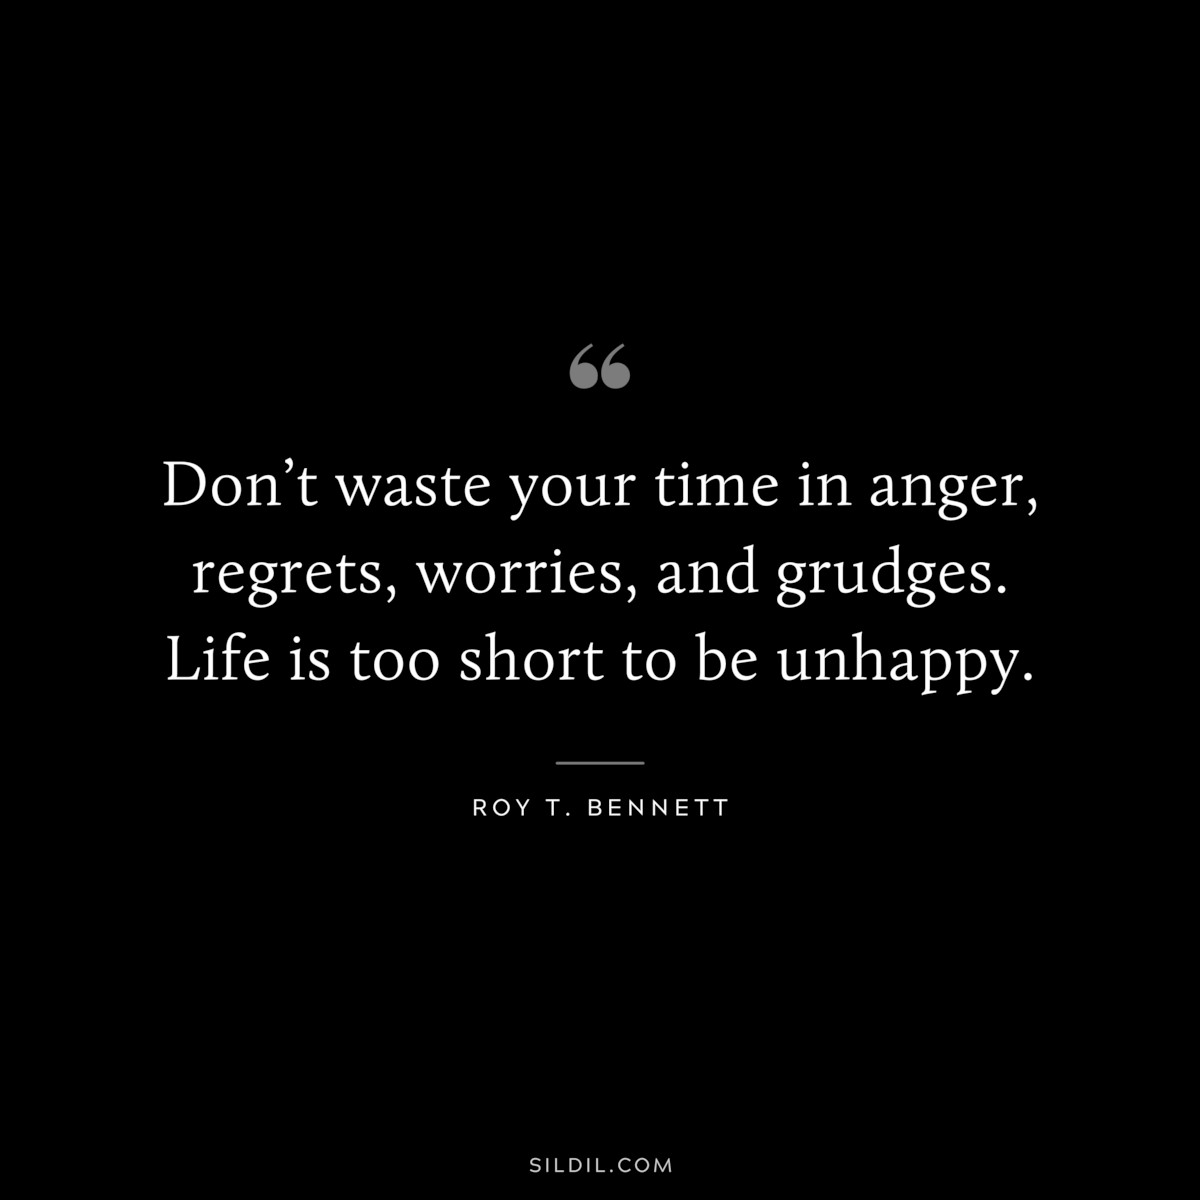 Don’t waste your time in anger, regrets, worries, and grudges. Life is too short to be unhappy. ― Roy T. Bennett